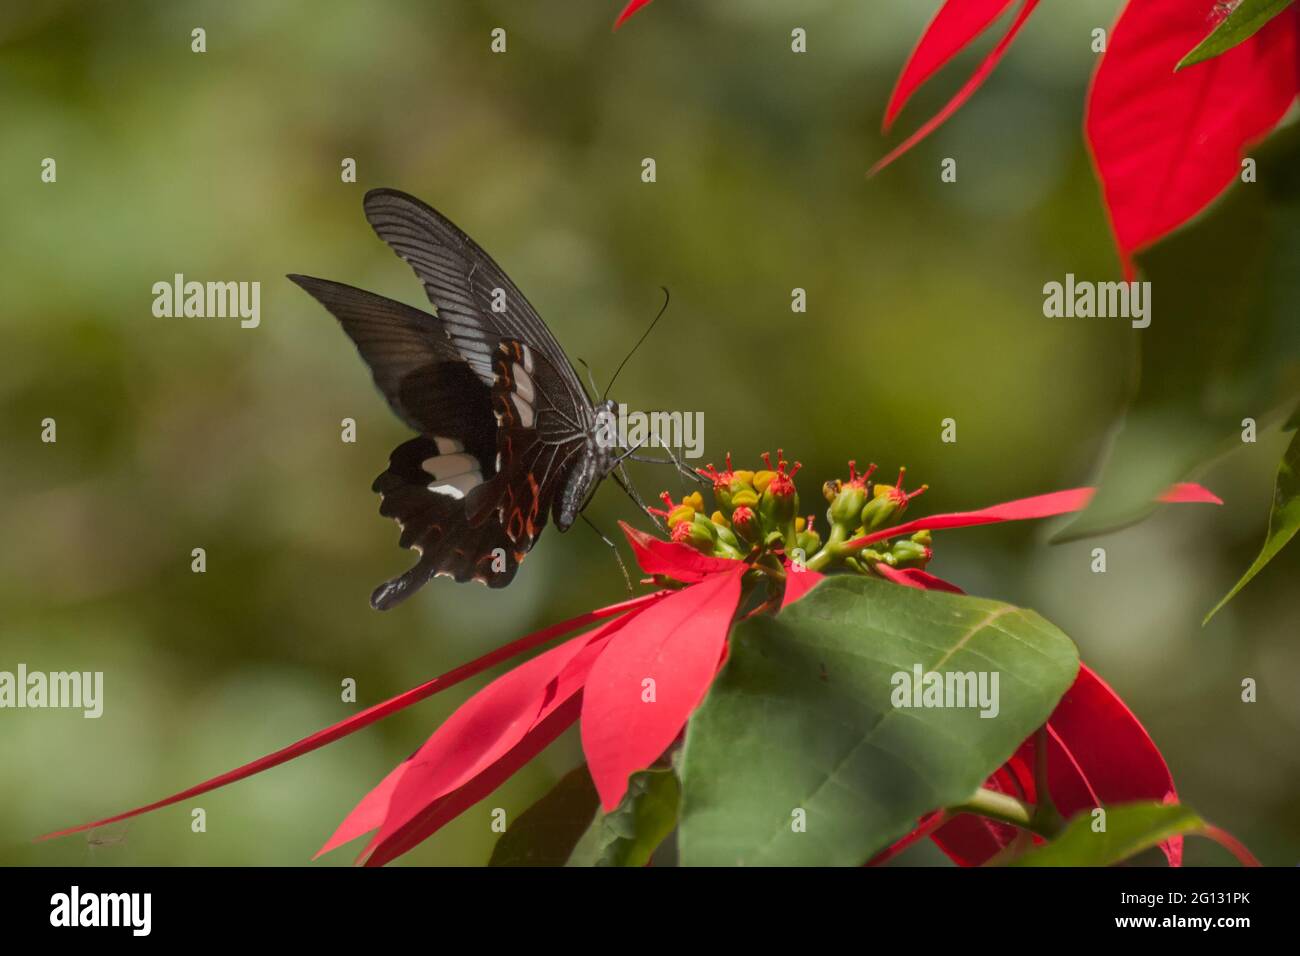 Common Mormon butterfly (papilio polytes linnaeus), sucking nectar from fully bloomed red flower. Image shot in a forest, sikkim, India. Stock Photo